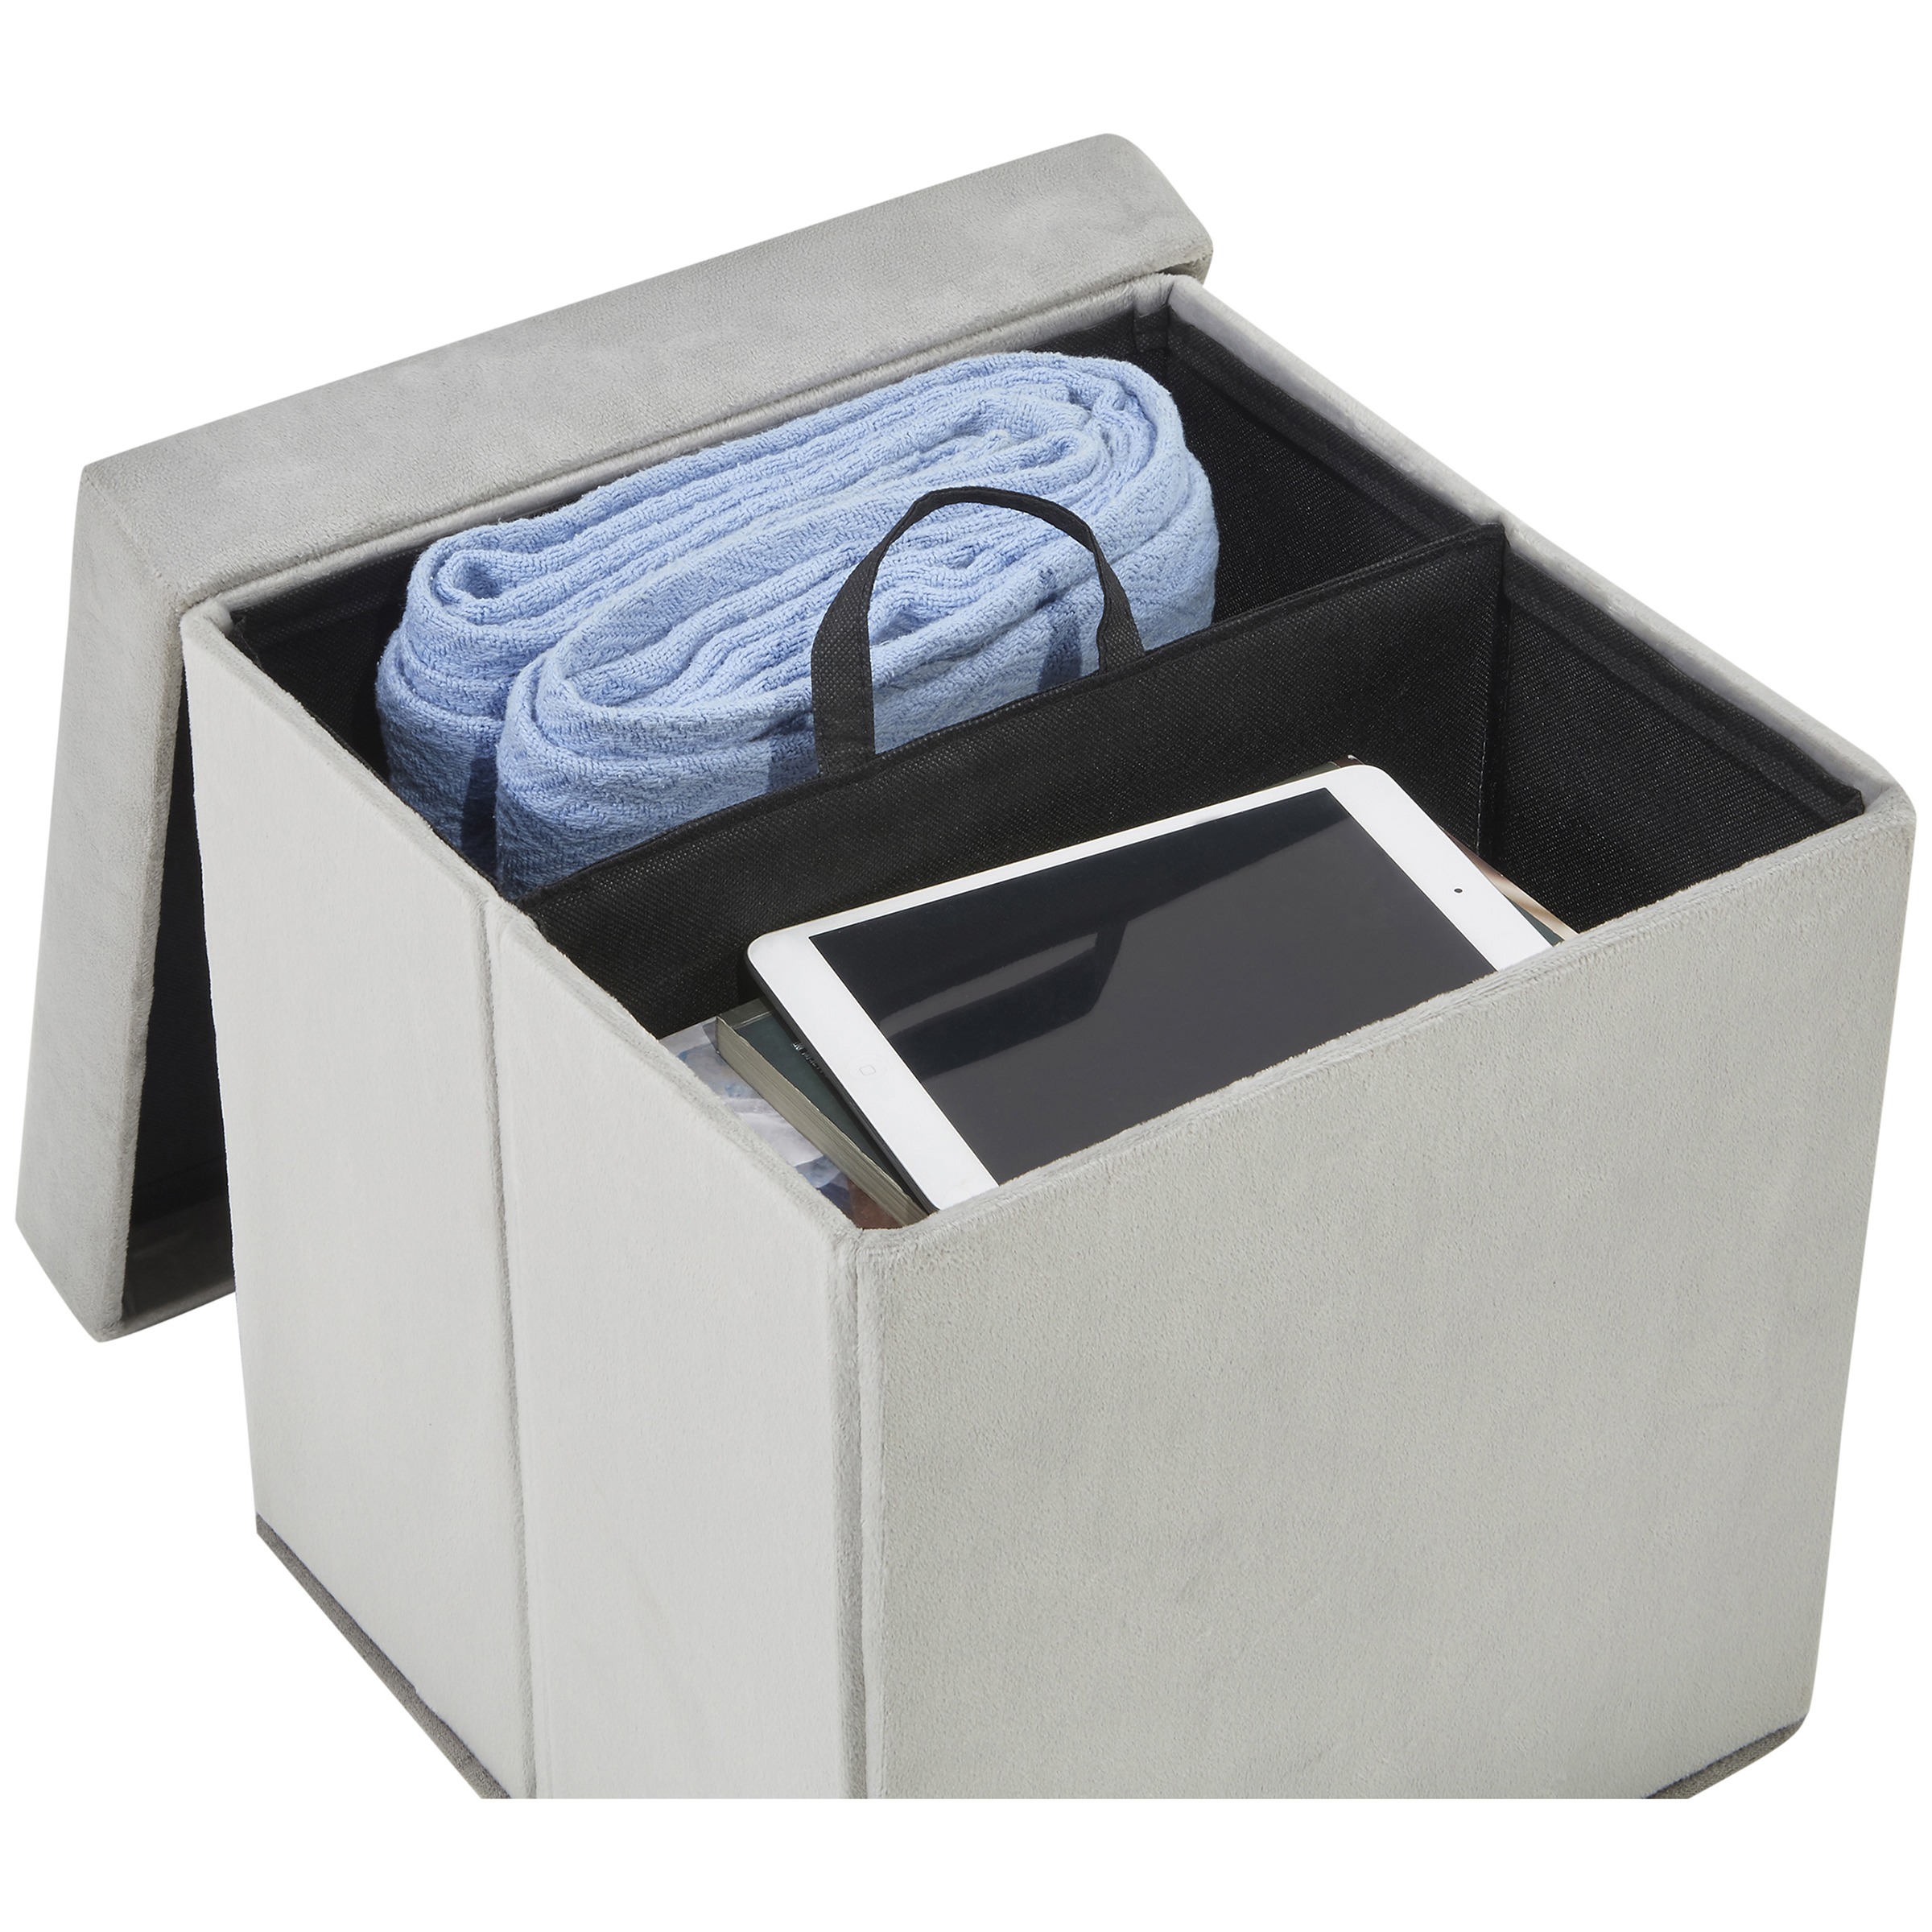 Mainstays Ultra Collapsible Storage Ottoman, Gray Faux Suede - image 3 of 6